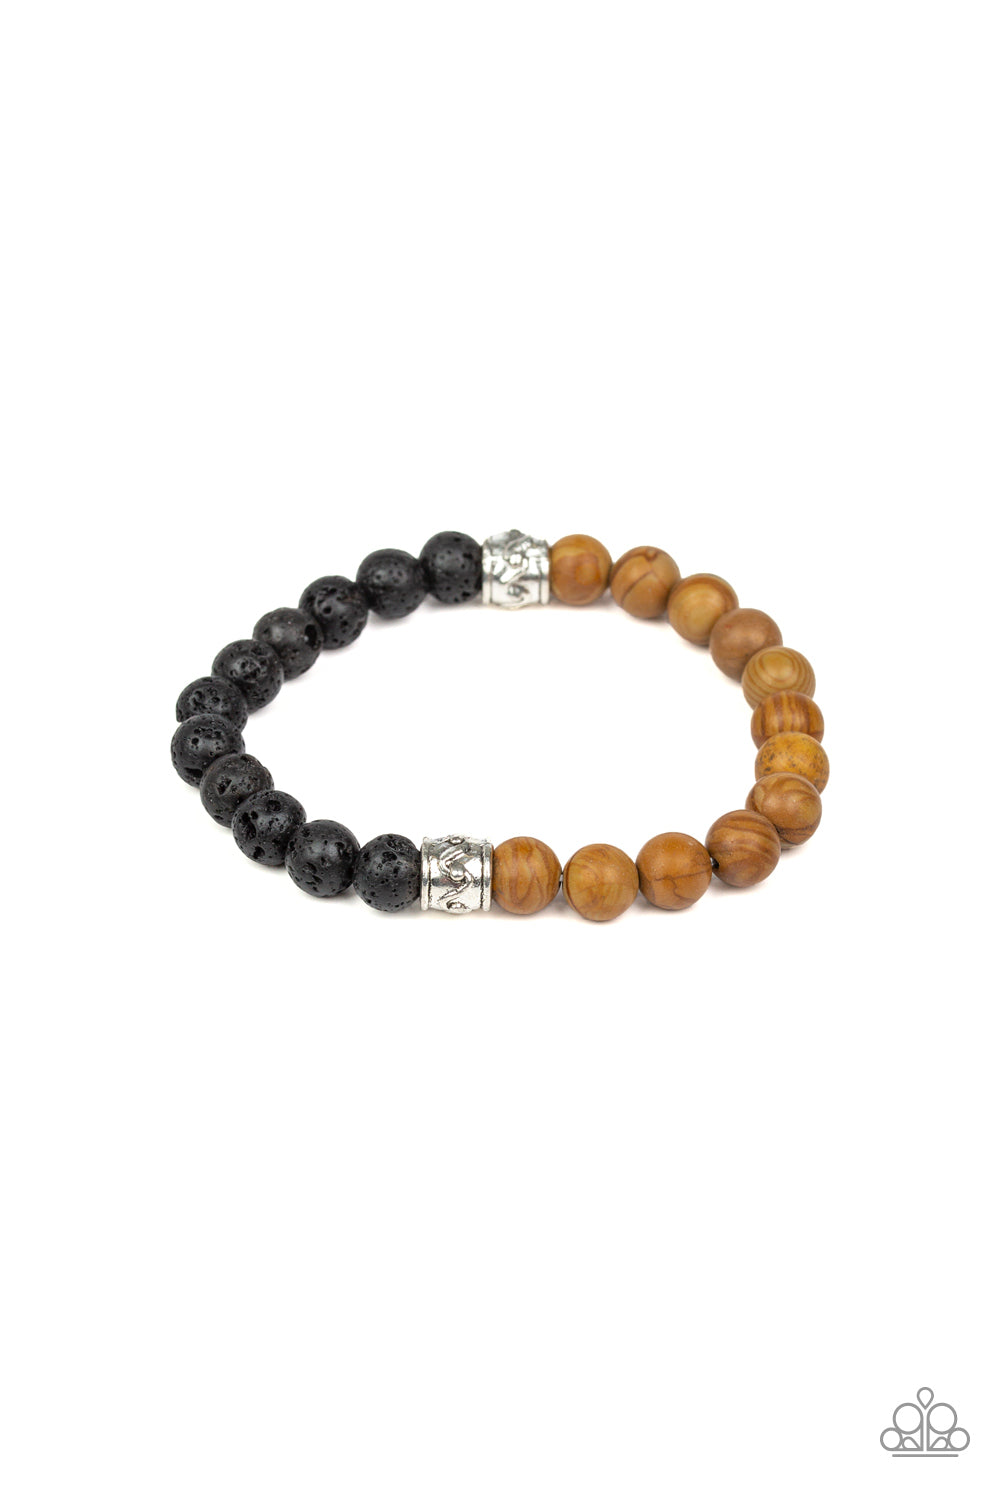 &lt;P&gt;A collection of black lava rock beads, brown stone beads, and ornate silver accents are threaded along a stretchy band around the wrist for a seasonal look.
&lt;/P&gt;  

&lt;P&gt; &lt;I&gt;Sold as one individual bracelet. &lt;/I&gt;&lt;/P&gt;

&lt;img src=\&quot;https://d9b54x484lq62.cloudfront.net/paparazzi/shopping/images/517_tag150x115_1.png\&quot; alt=\&quot;New Kit\&quot; align=\&quot;middle\&quot; height=\&quot;50\&quot; width=\&quot;50\&quot;/&gt;